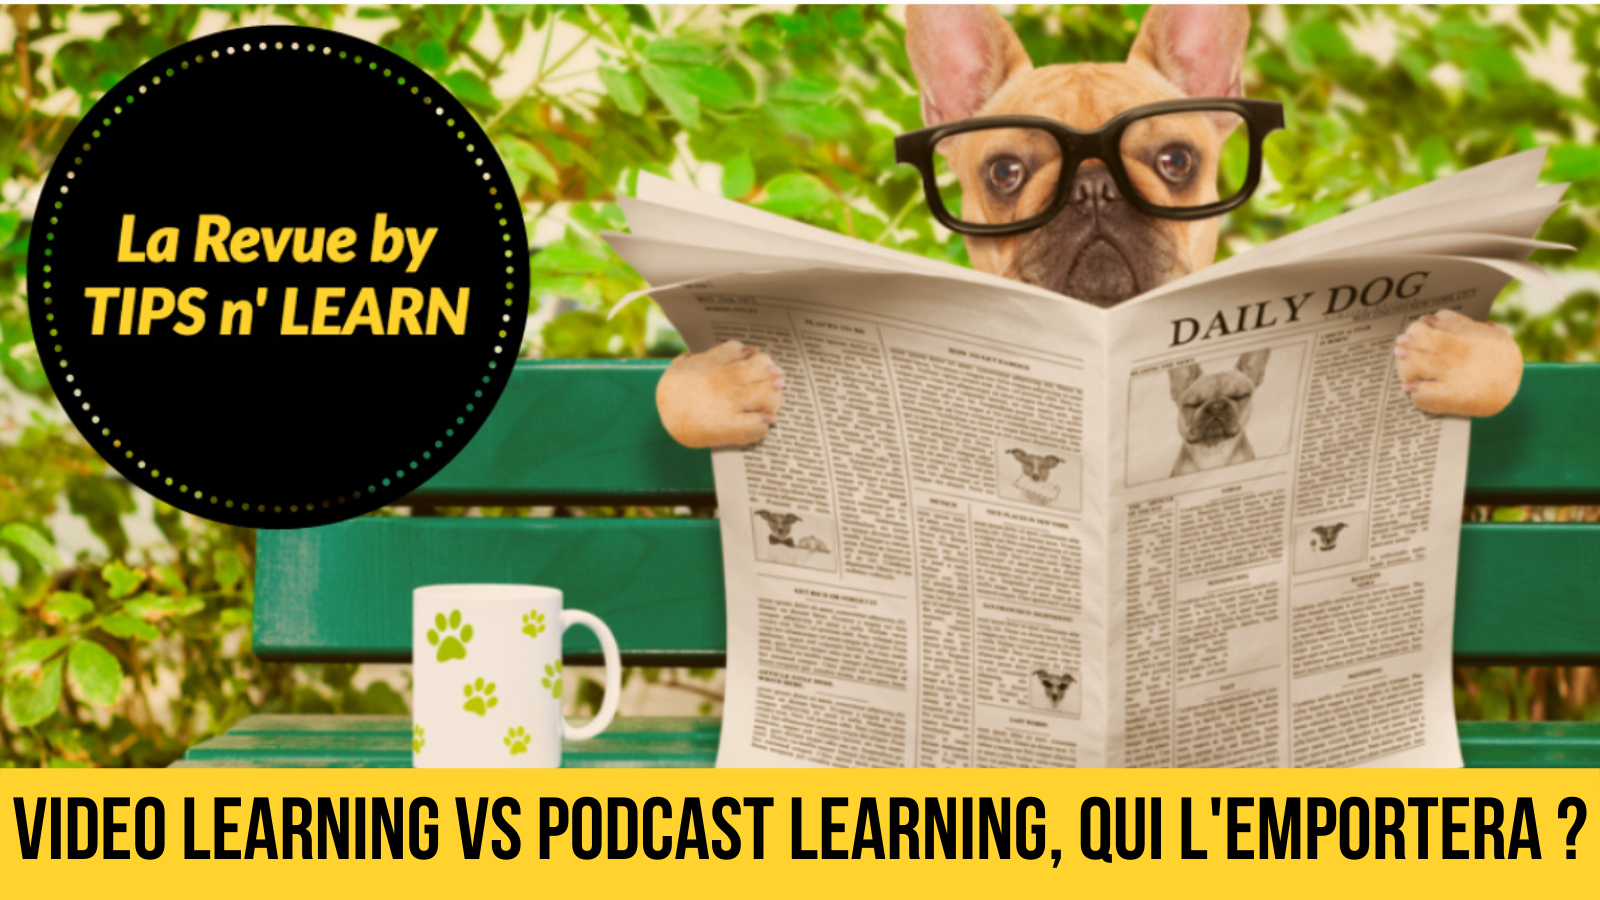 Video vs podcast learning